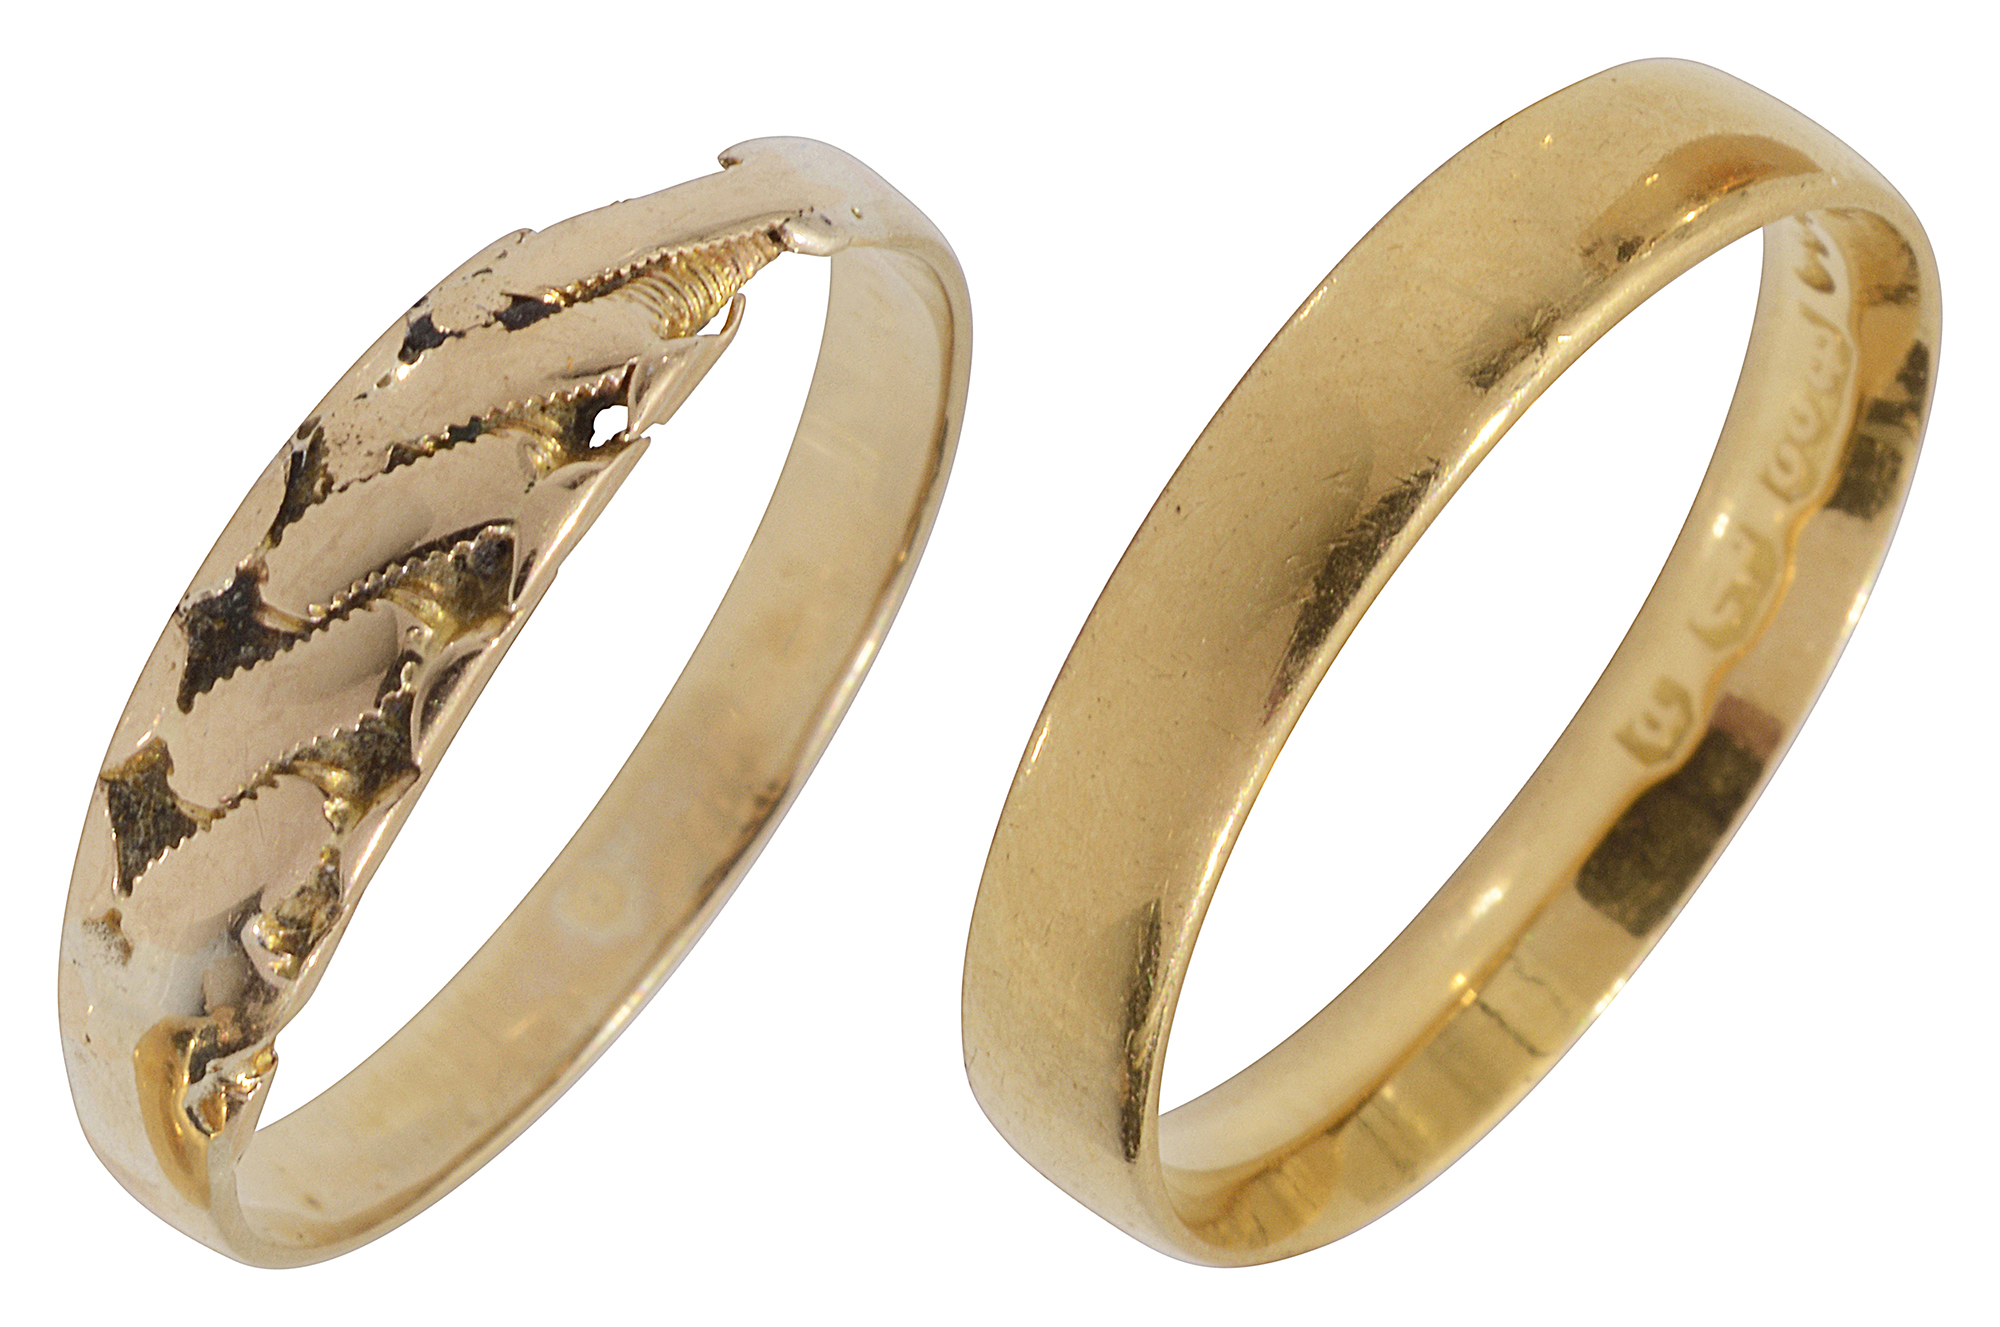 A 22ct gold band together with another ring